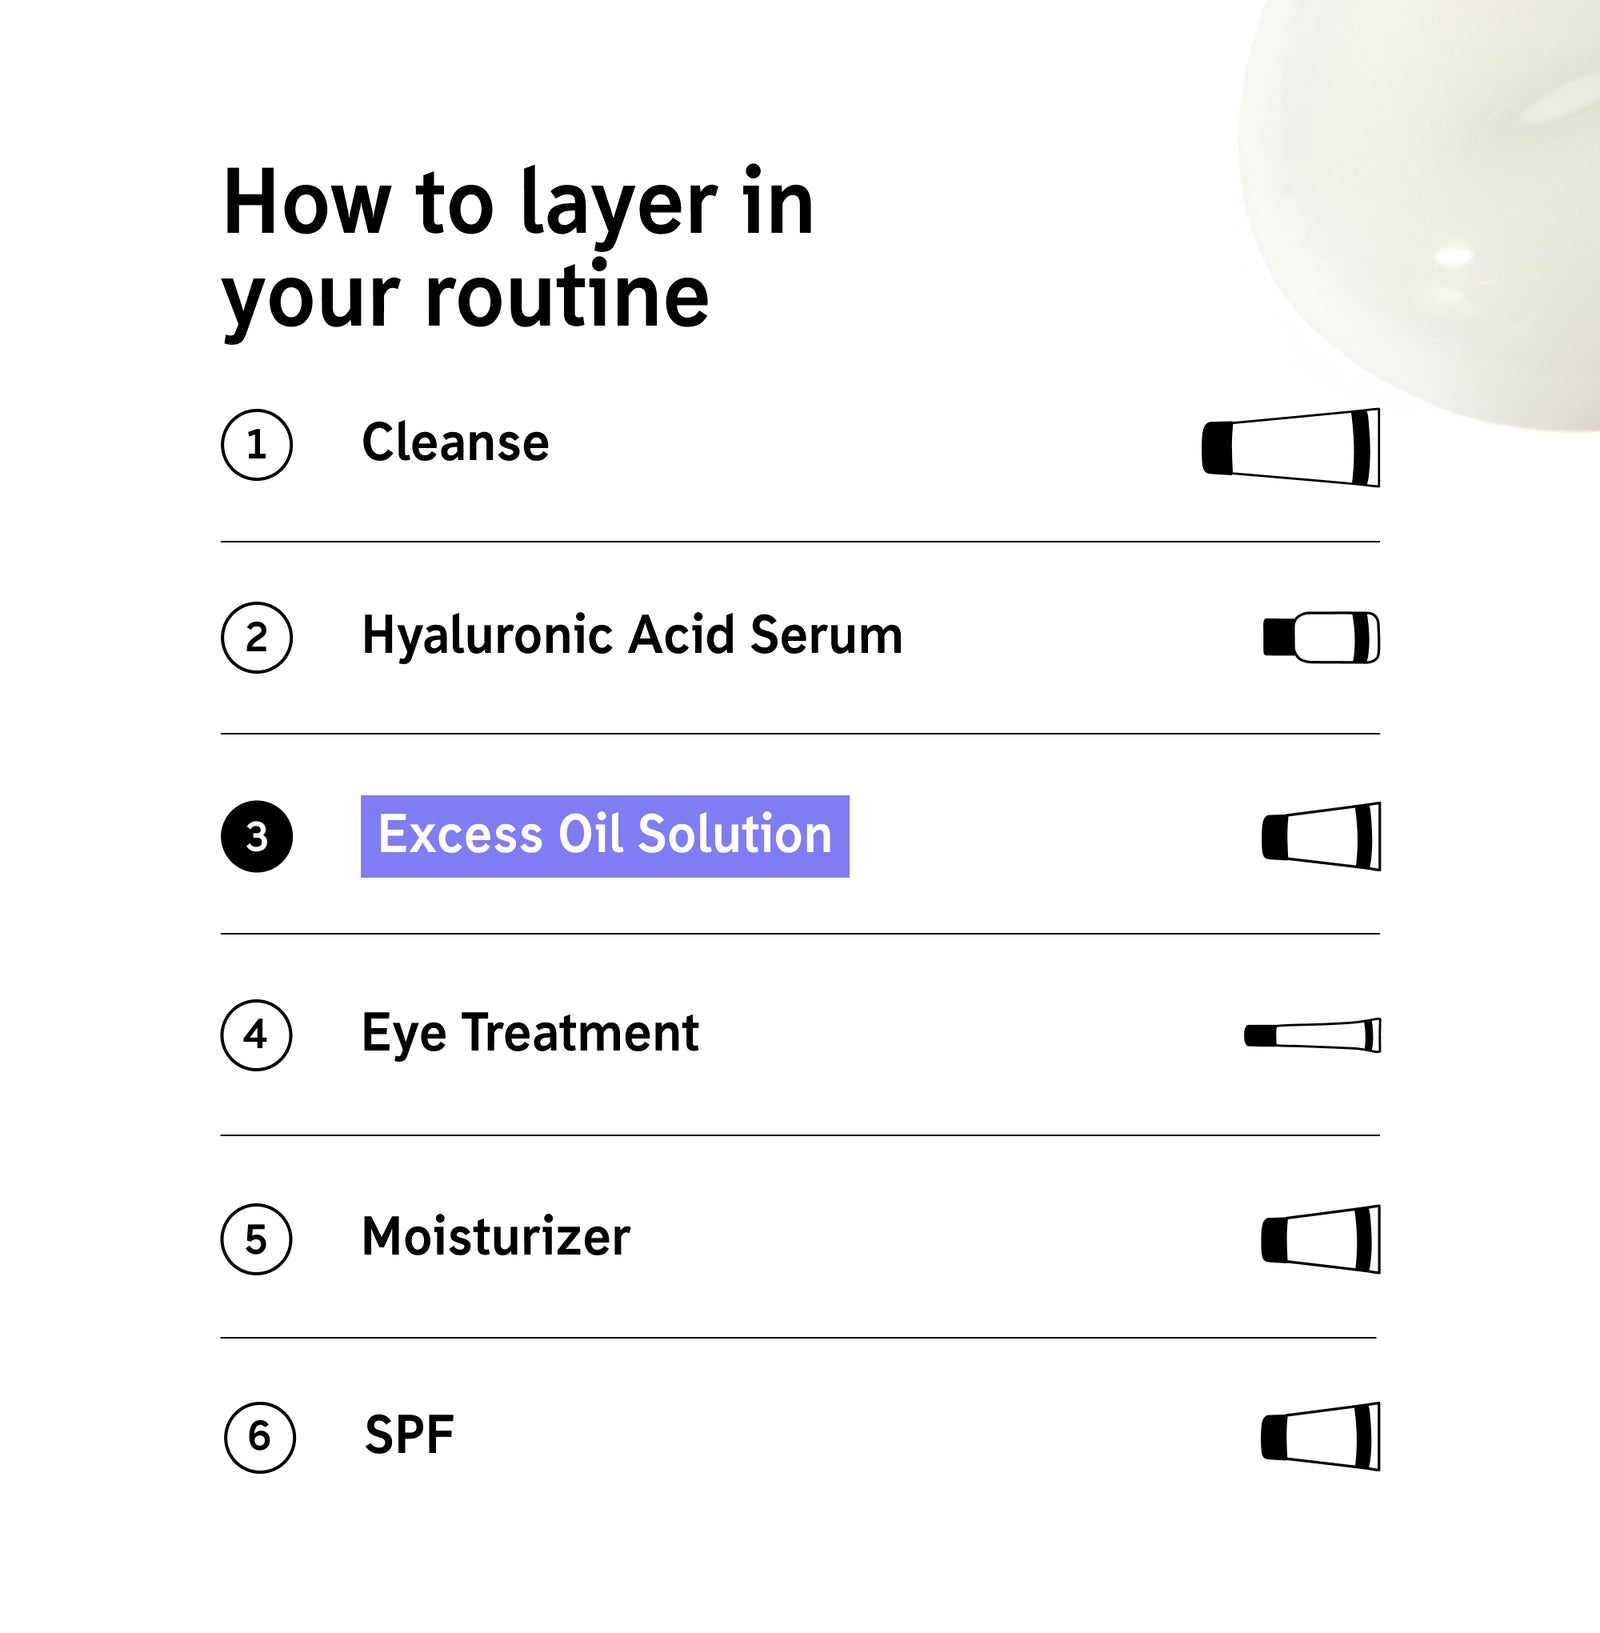 How to layer Excess Oil Solution in your routine